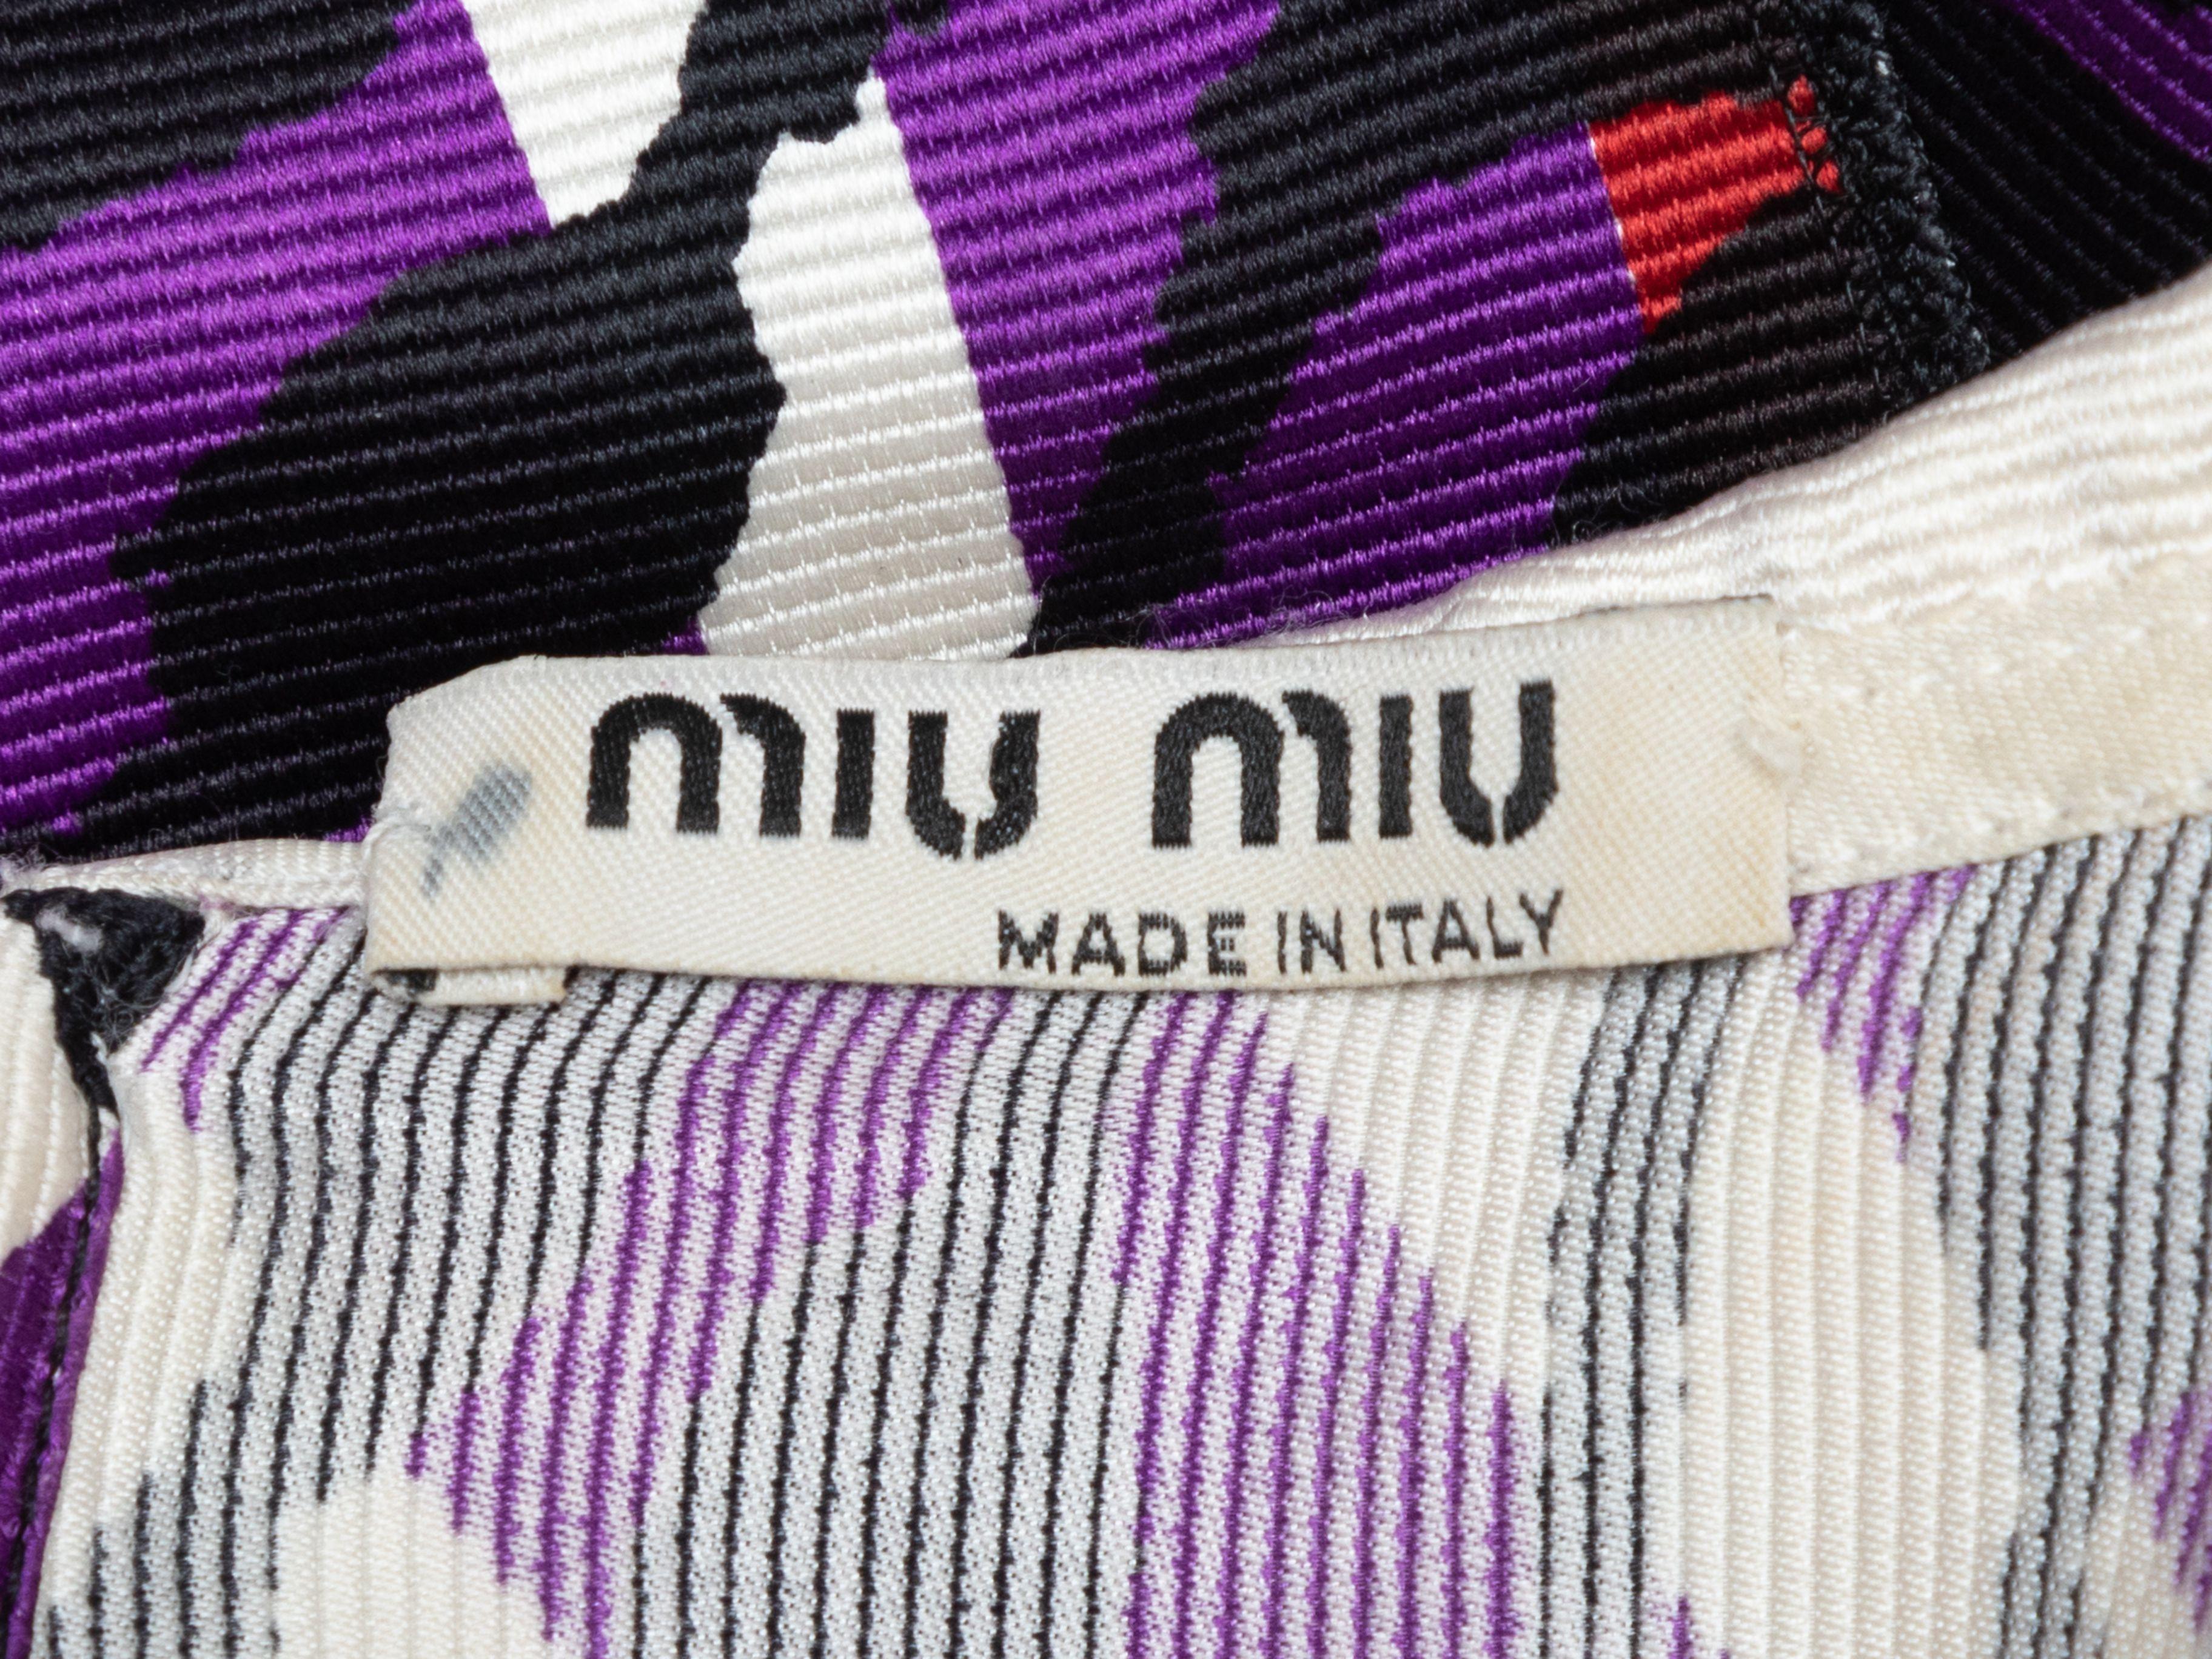 Product Details: Purple and multicolor printed dress by Miu Miu. Peter Pan collar. Three-quarter sleeves. Button closure at nape. 30